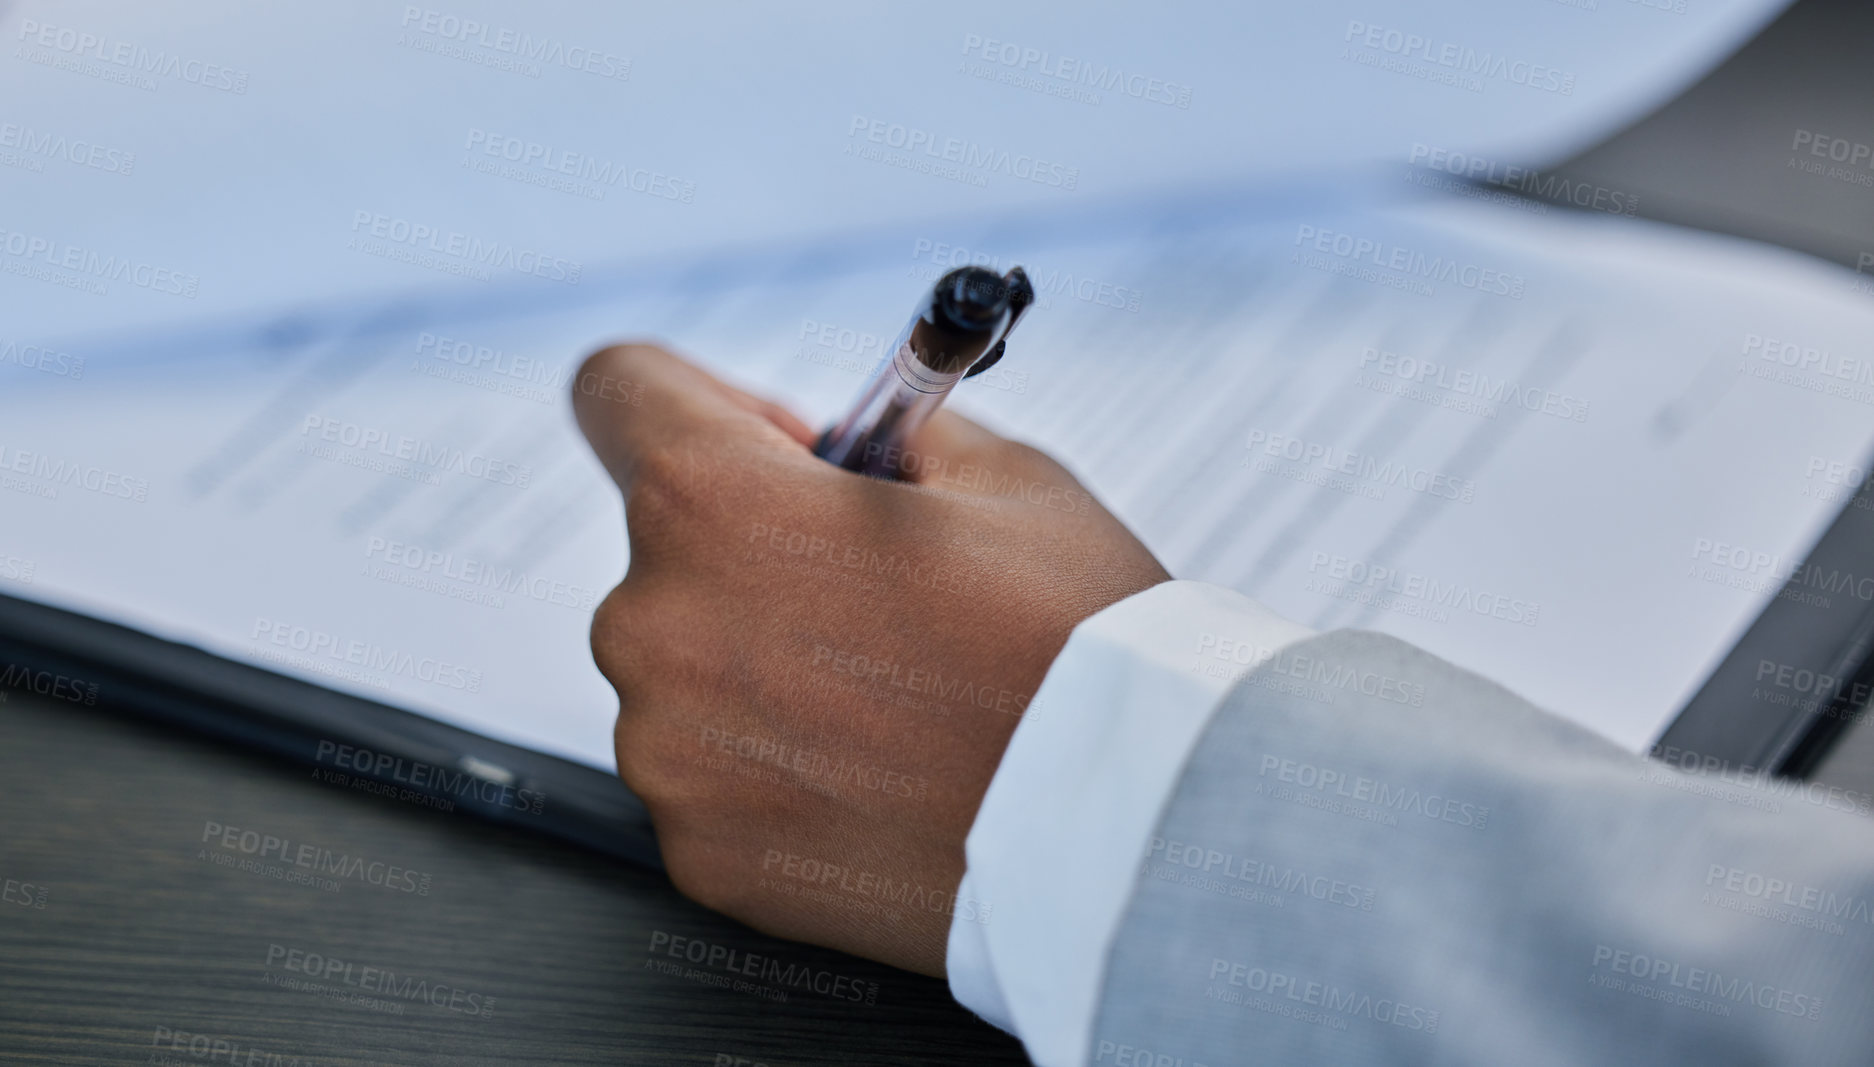 Buy stock photo Shot of s businessman filling out paperwork in his office